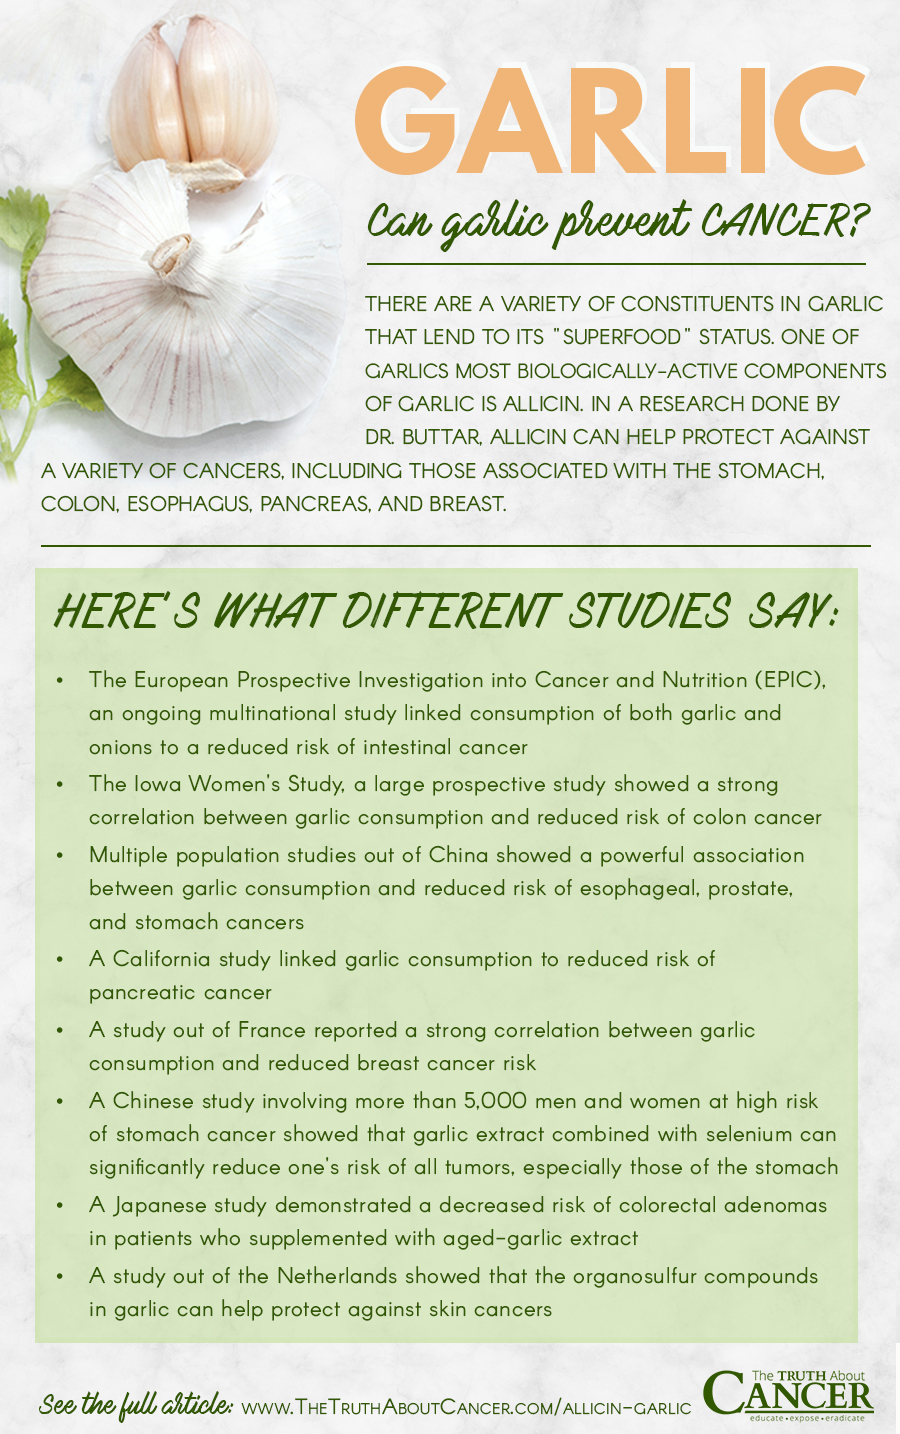 Can Garlic prevent Cancer?